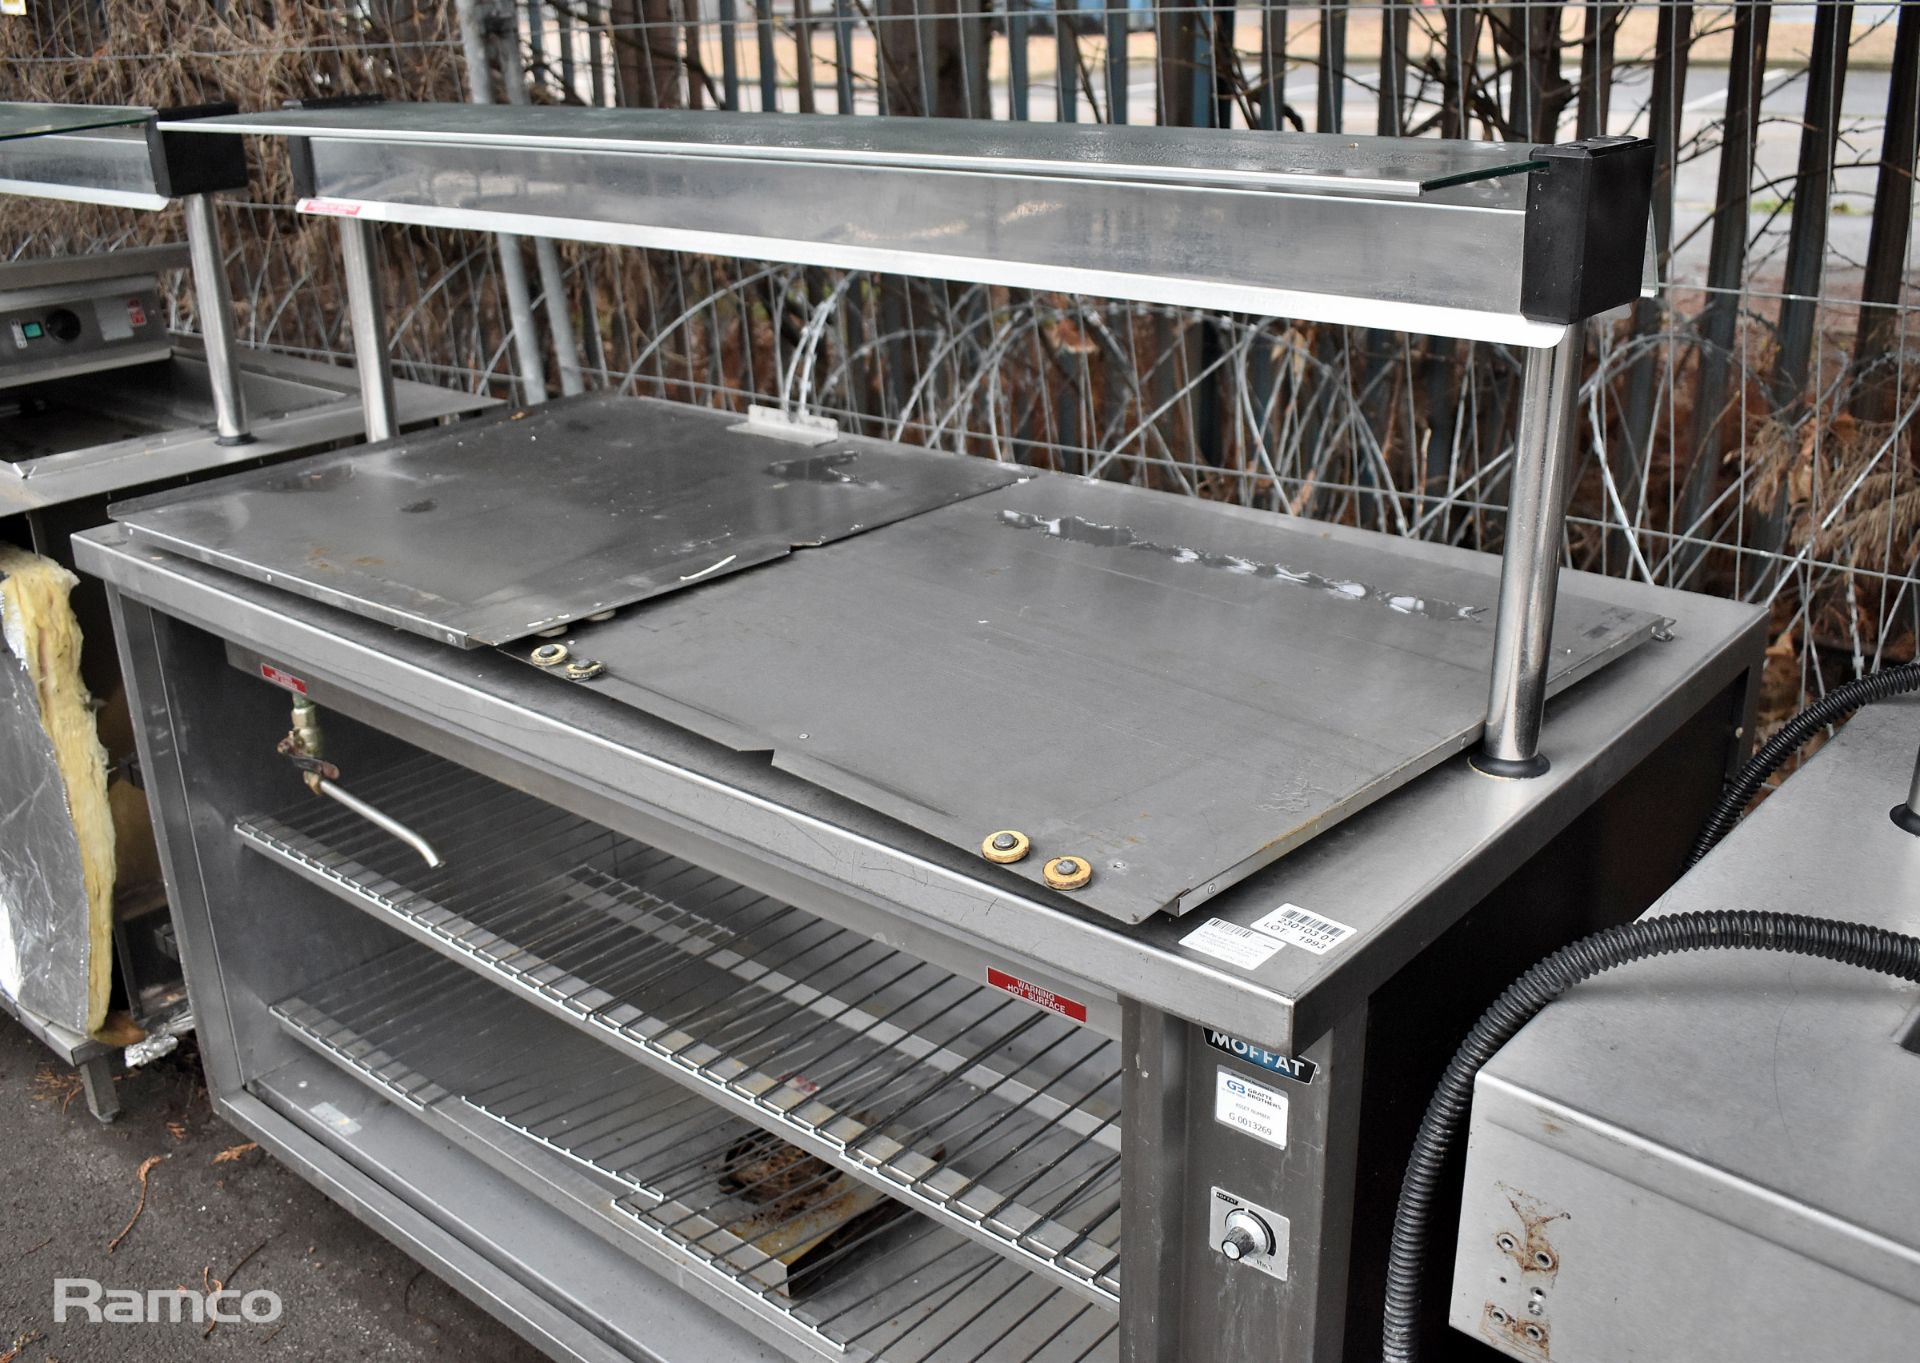 Moffat stainless steel bain marie with heated gantry - L155 x W80 x H132cm - Image 10 of 17